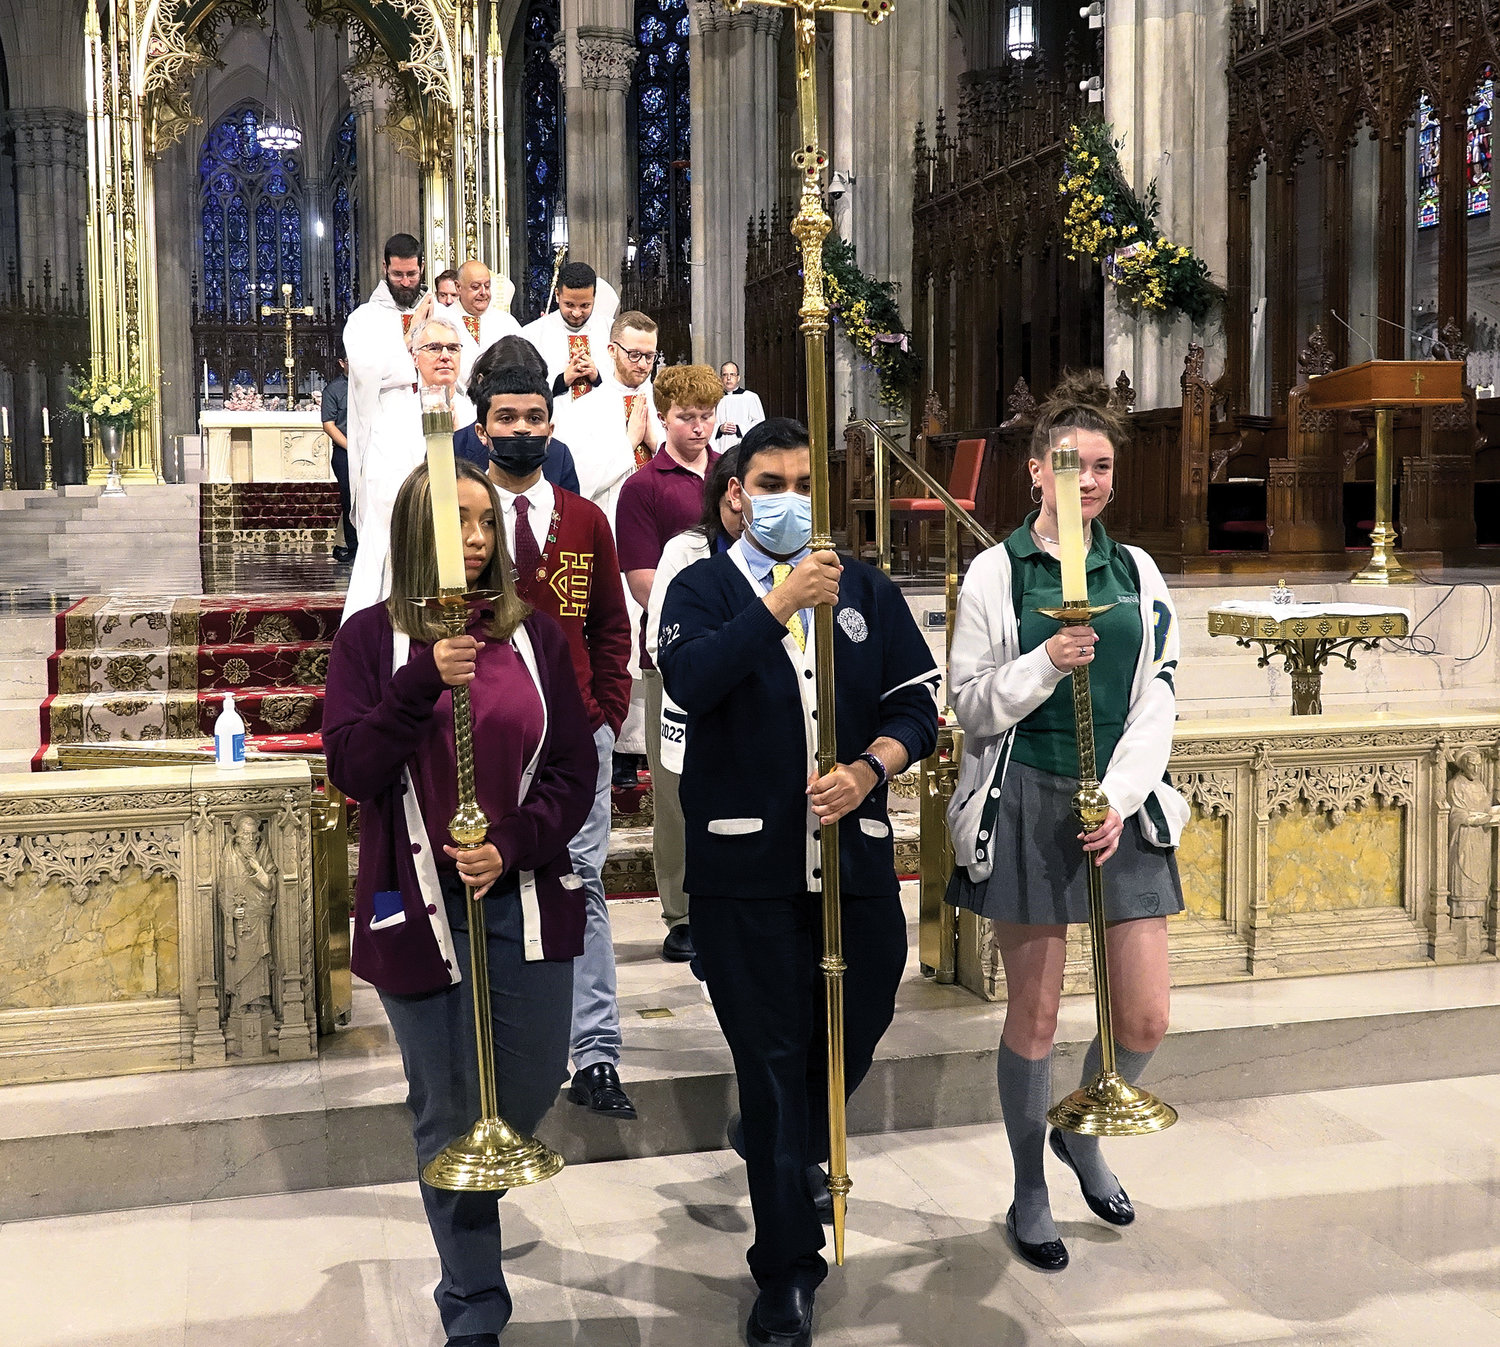 The cross bearer, flanked by candle bearers, recesses from the morning liturgy.